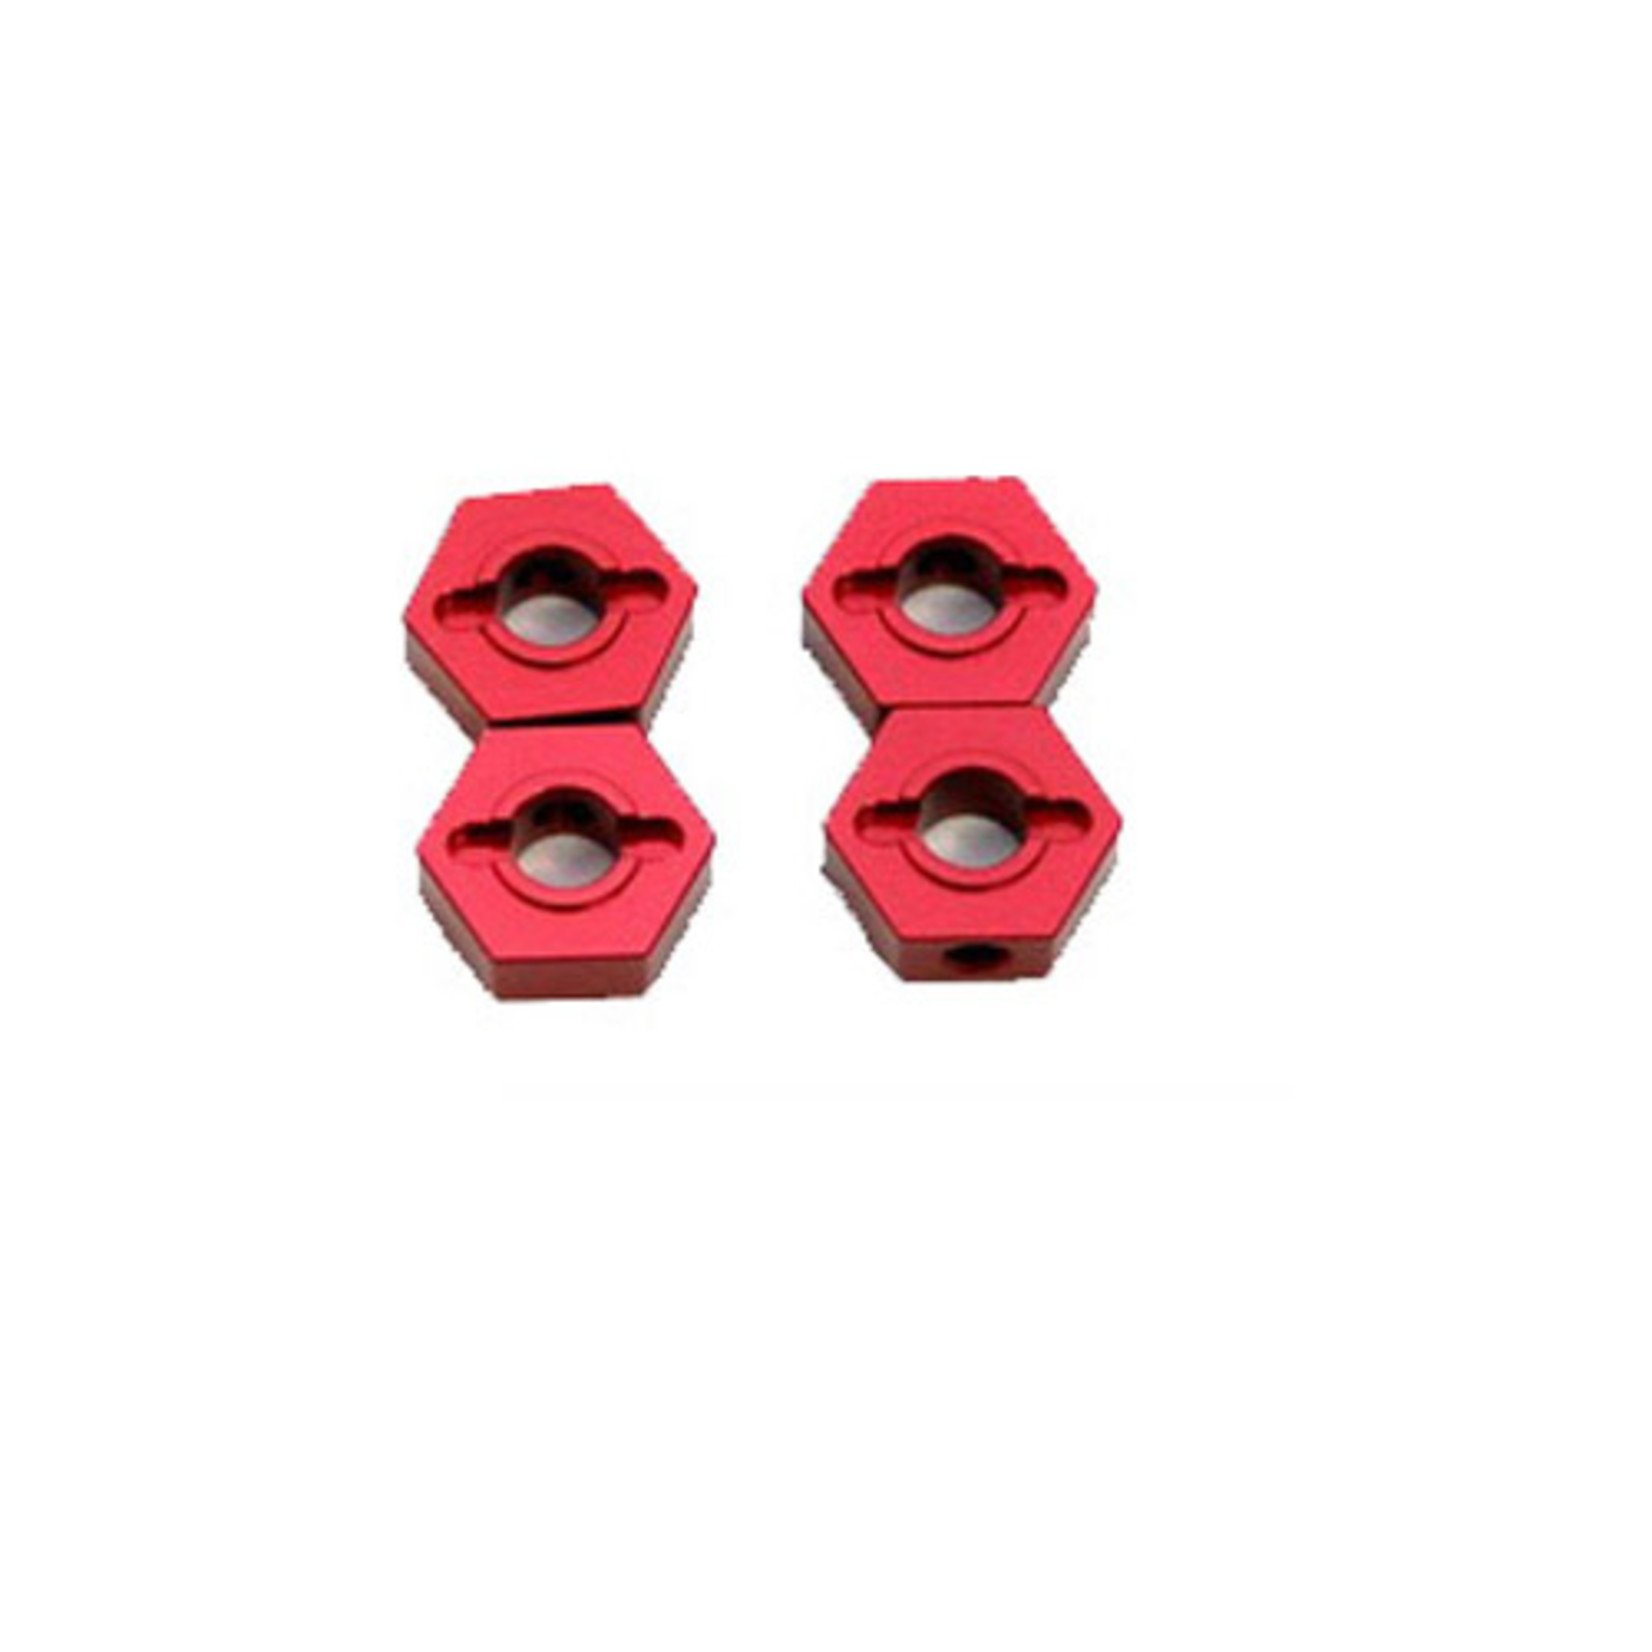 ST Racing Concepts SPTST1654R - Aluminum 12mm Hex Adapters, Red, for Traxxas Slash 4x4 / D